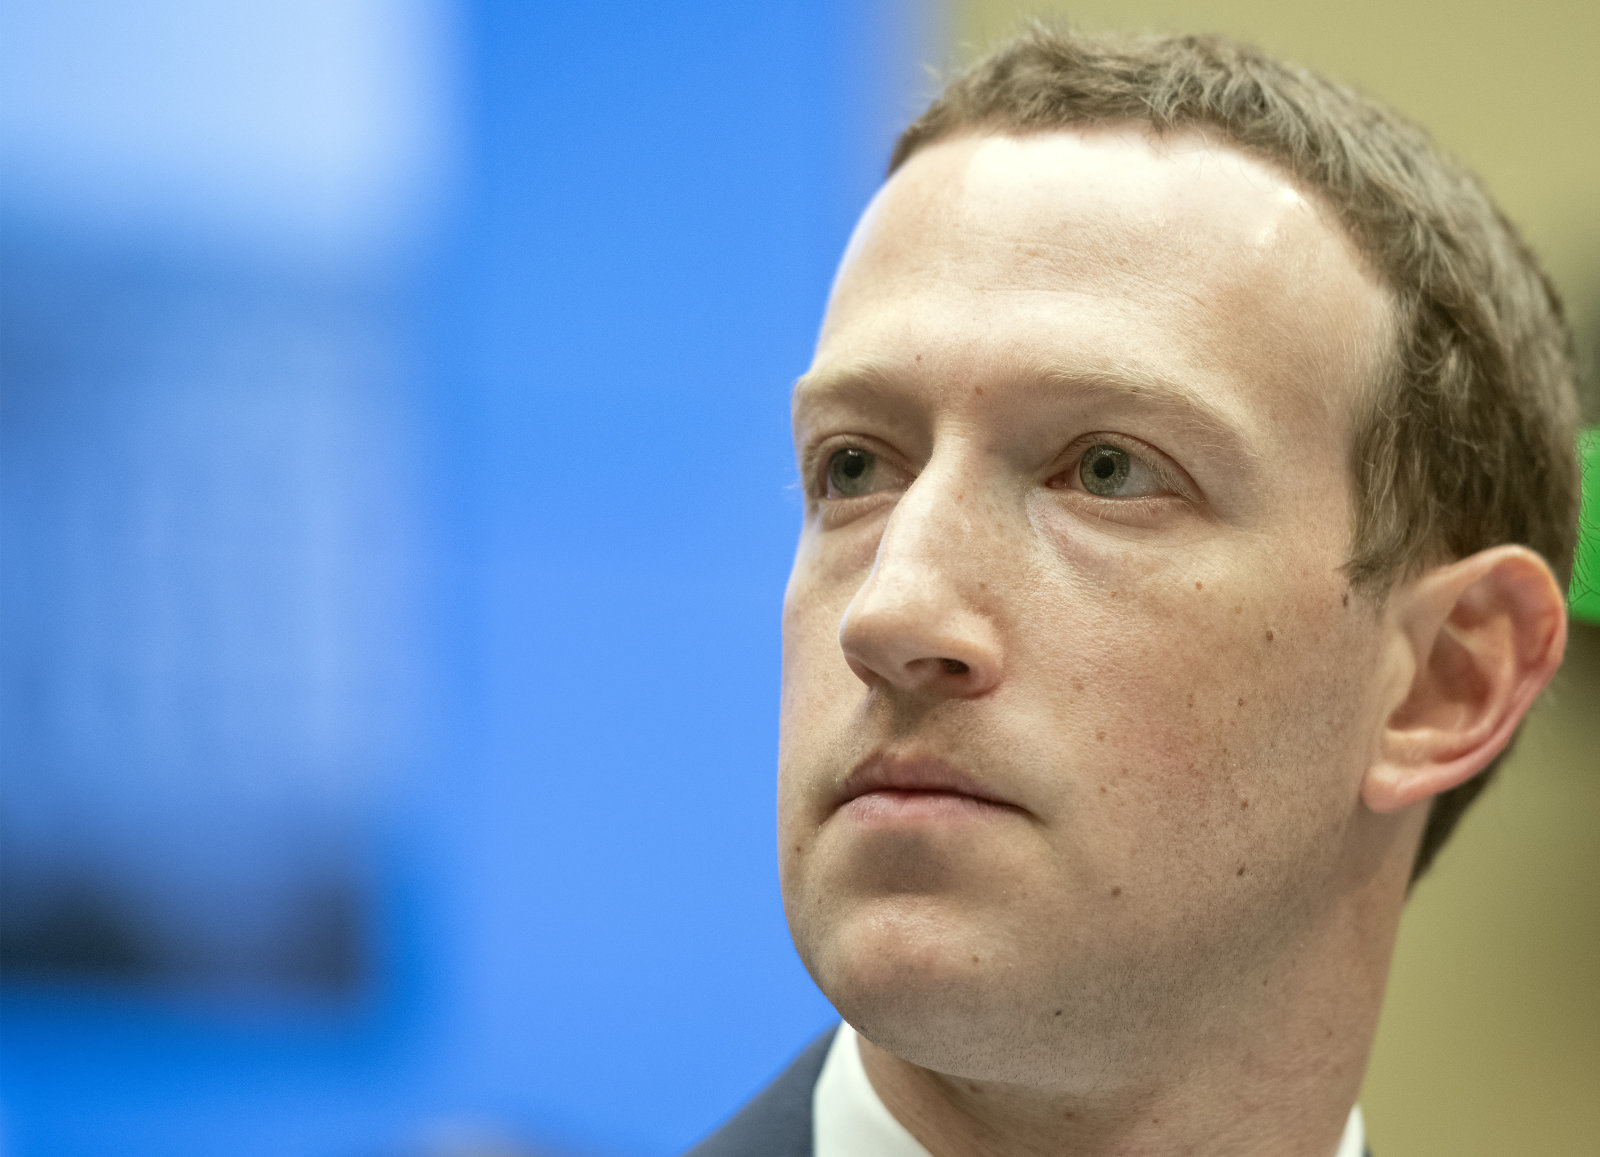 Hacker who vowed to delete Zuckerberg's Facebook account over livestream wisely reconsiders